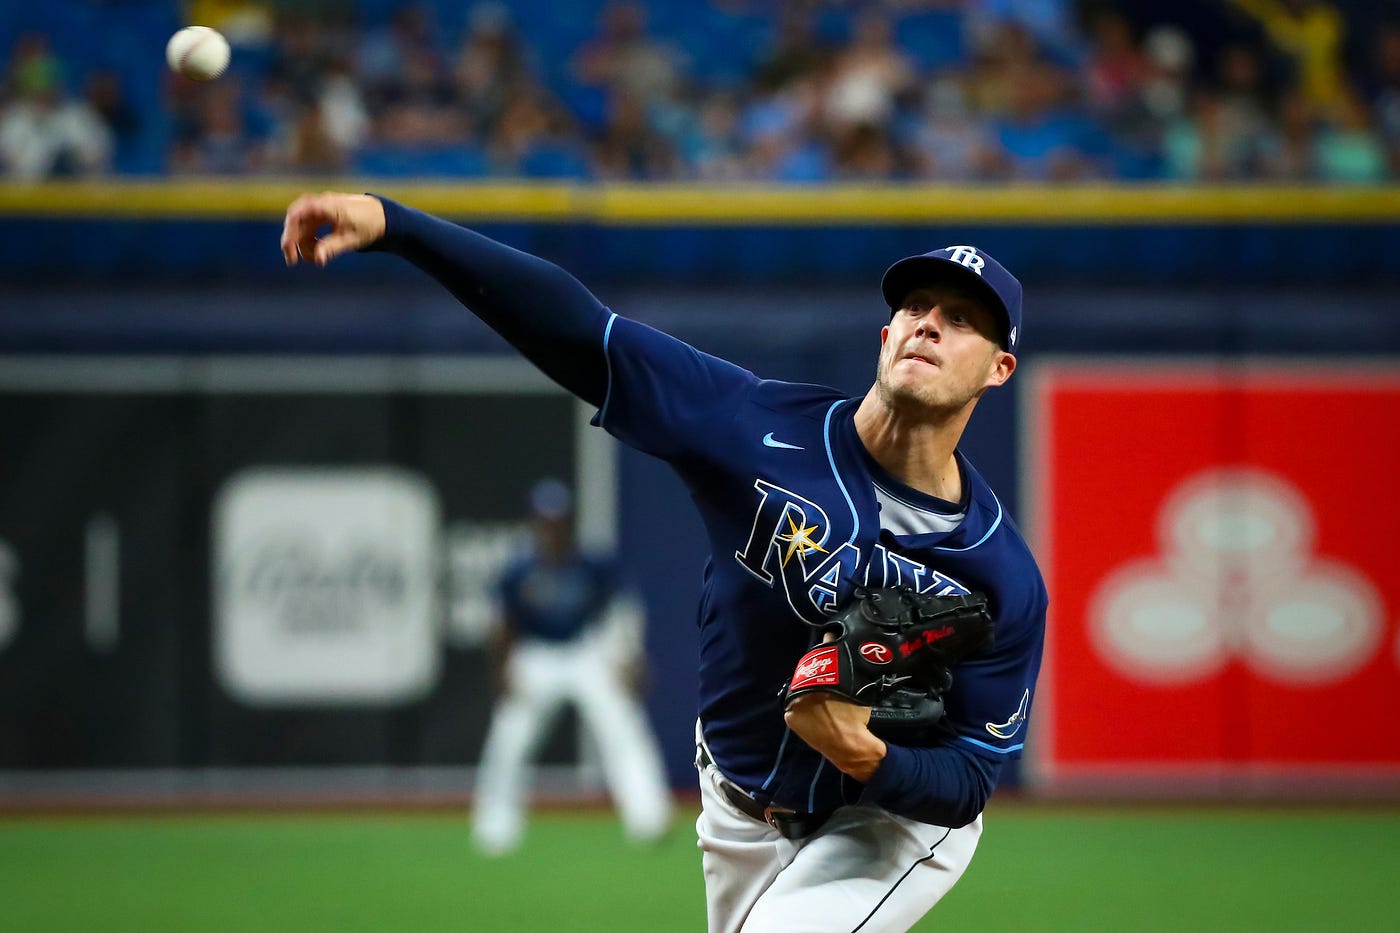 Brett Phillips 'okay' with being left off Rays' Division Series roster